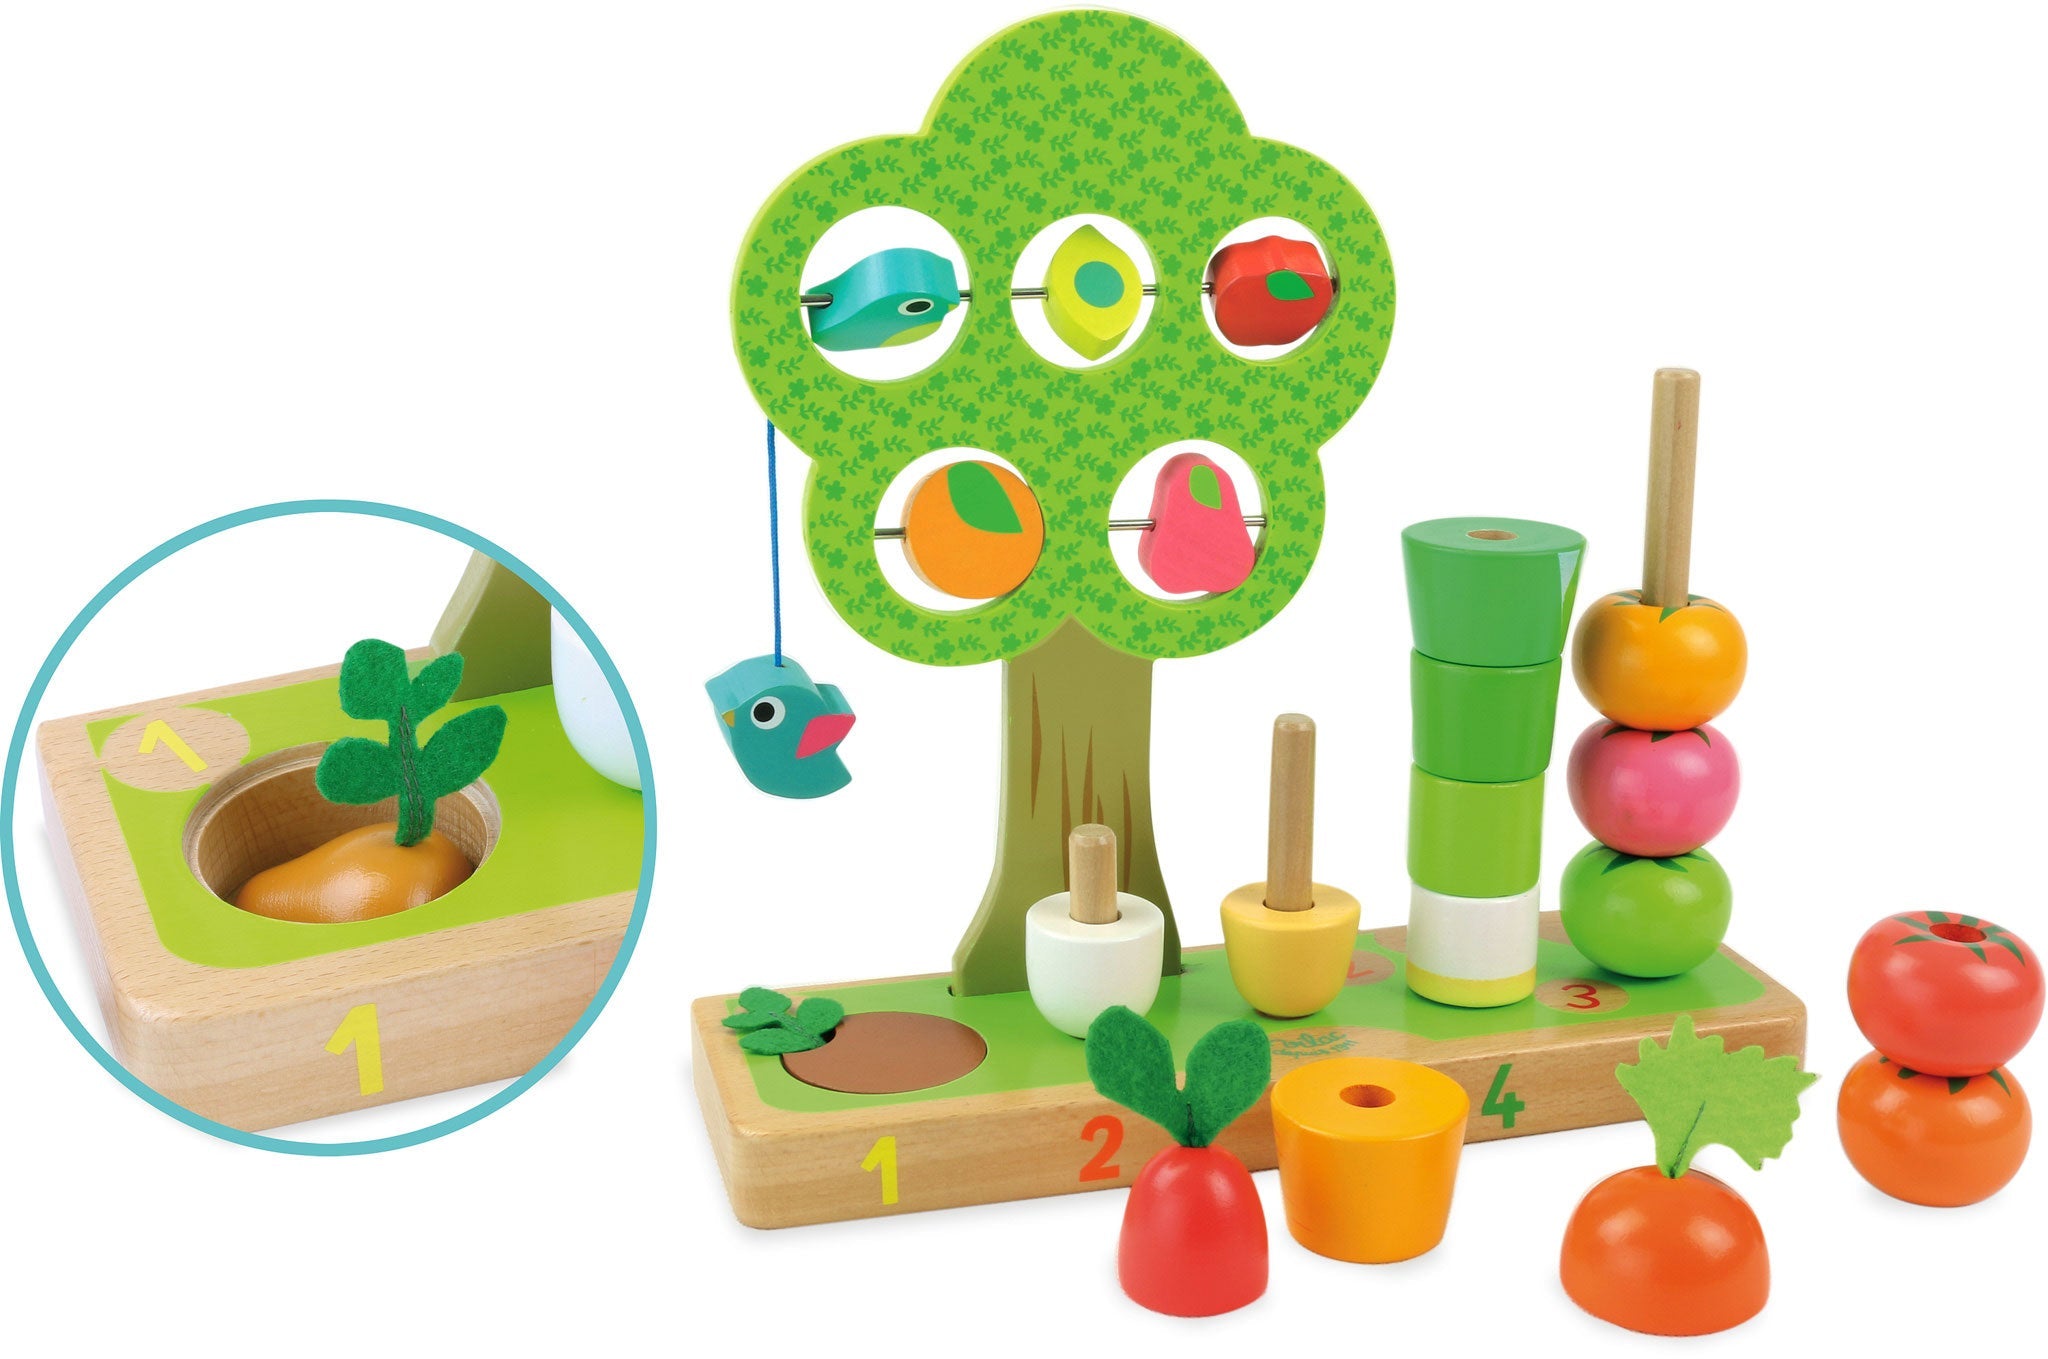 I learn counting vegetables wooden activity toy - Vilac